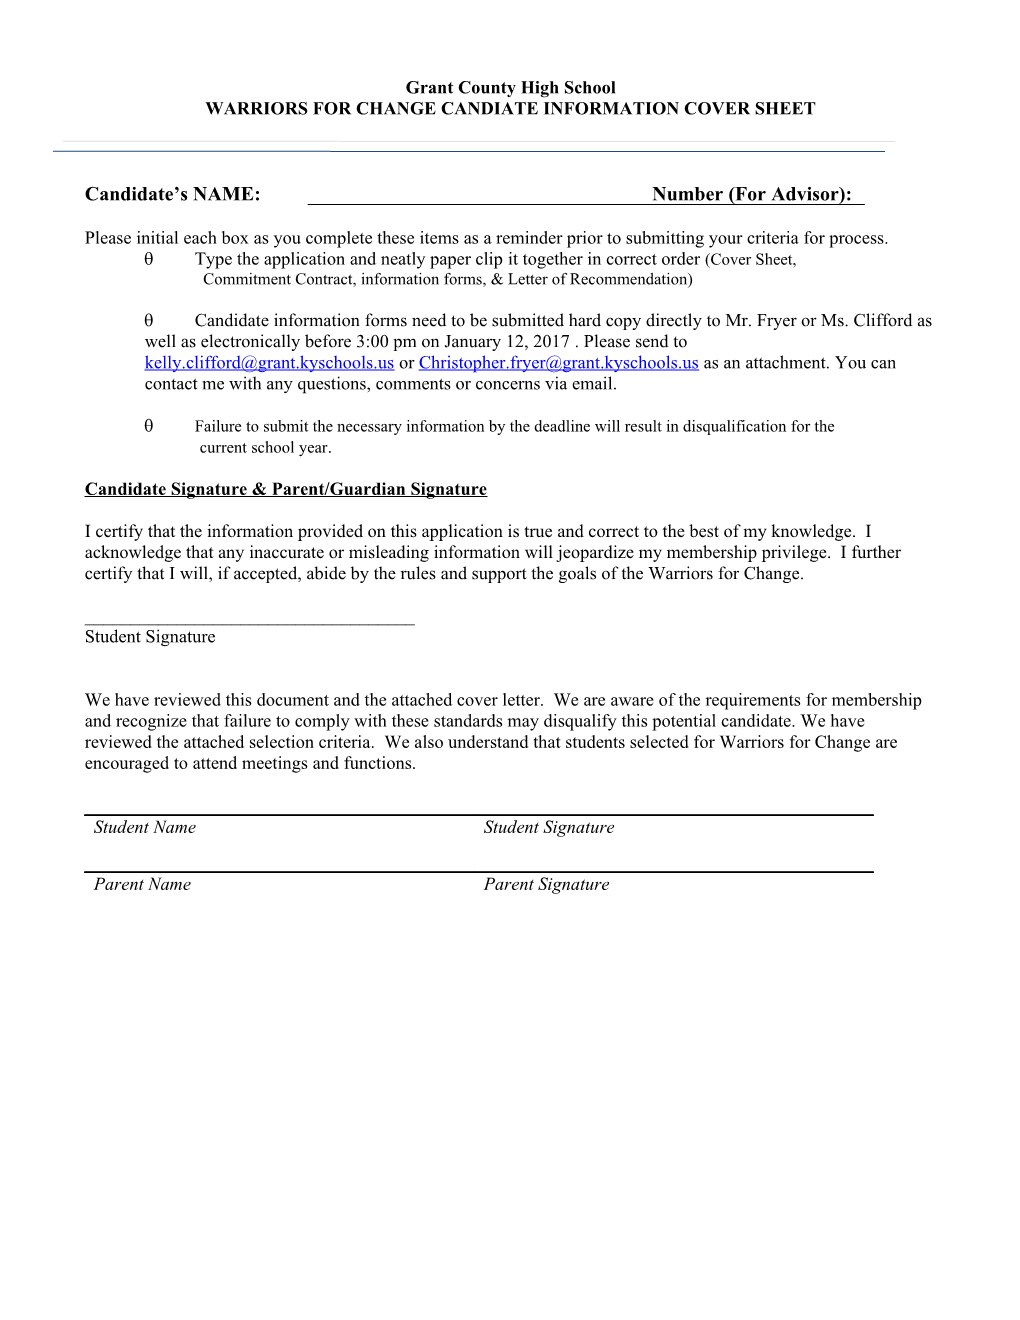 Redfield High School National Honor Society Application s1